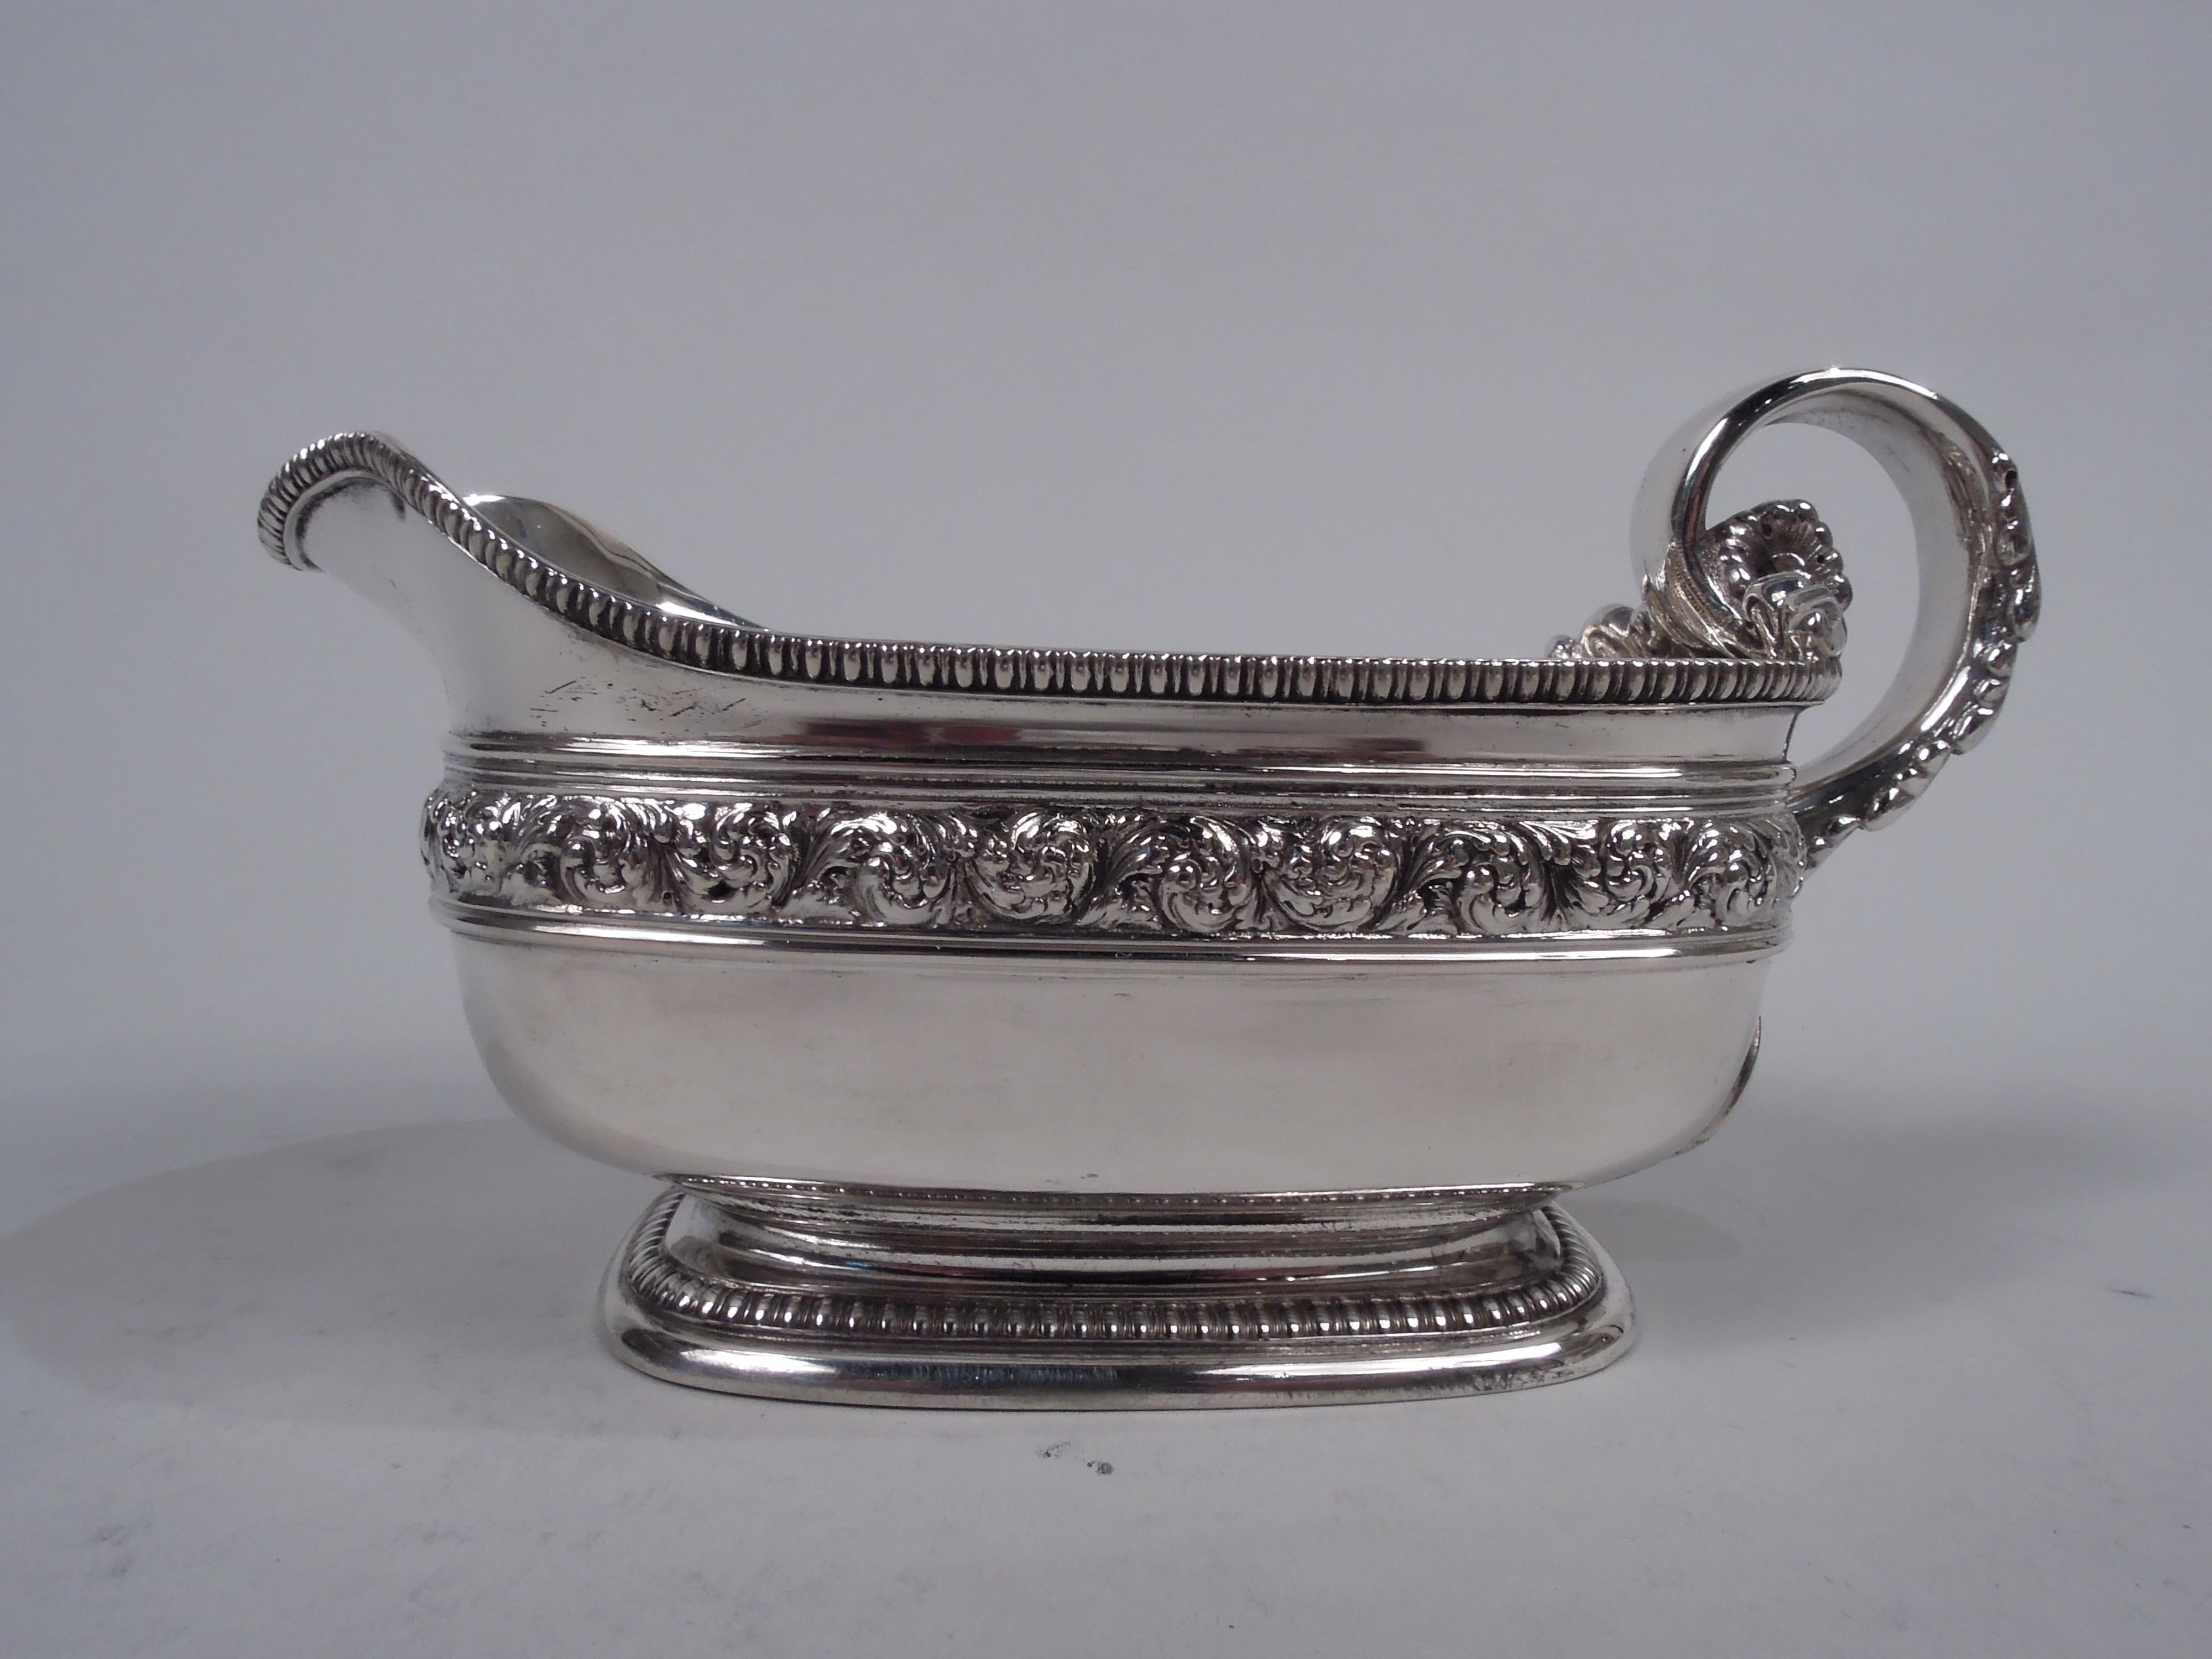 Pair of Victorian Classical sterling silver sauceboats. Made by Tiffany & Co. in New York, ca 1883. Each: Rectilinear body with lip spout and curved corners on same raised foot; high-looping leaf-covered handle with ribbed cast volute scroll